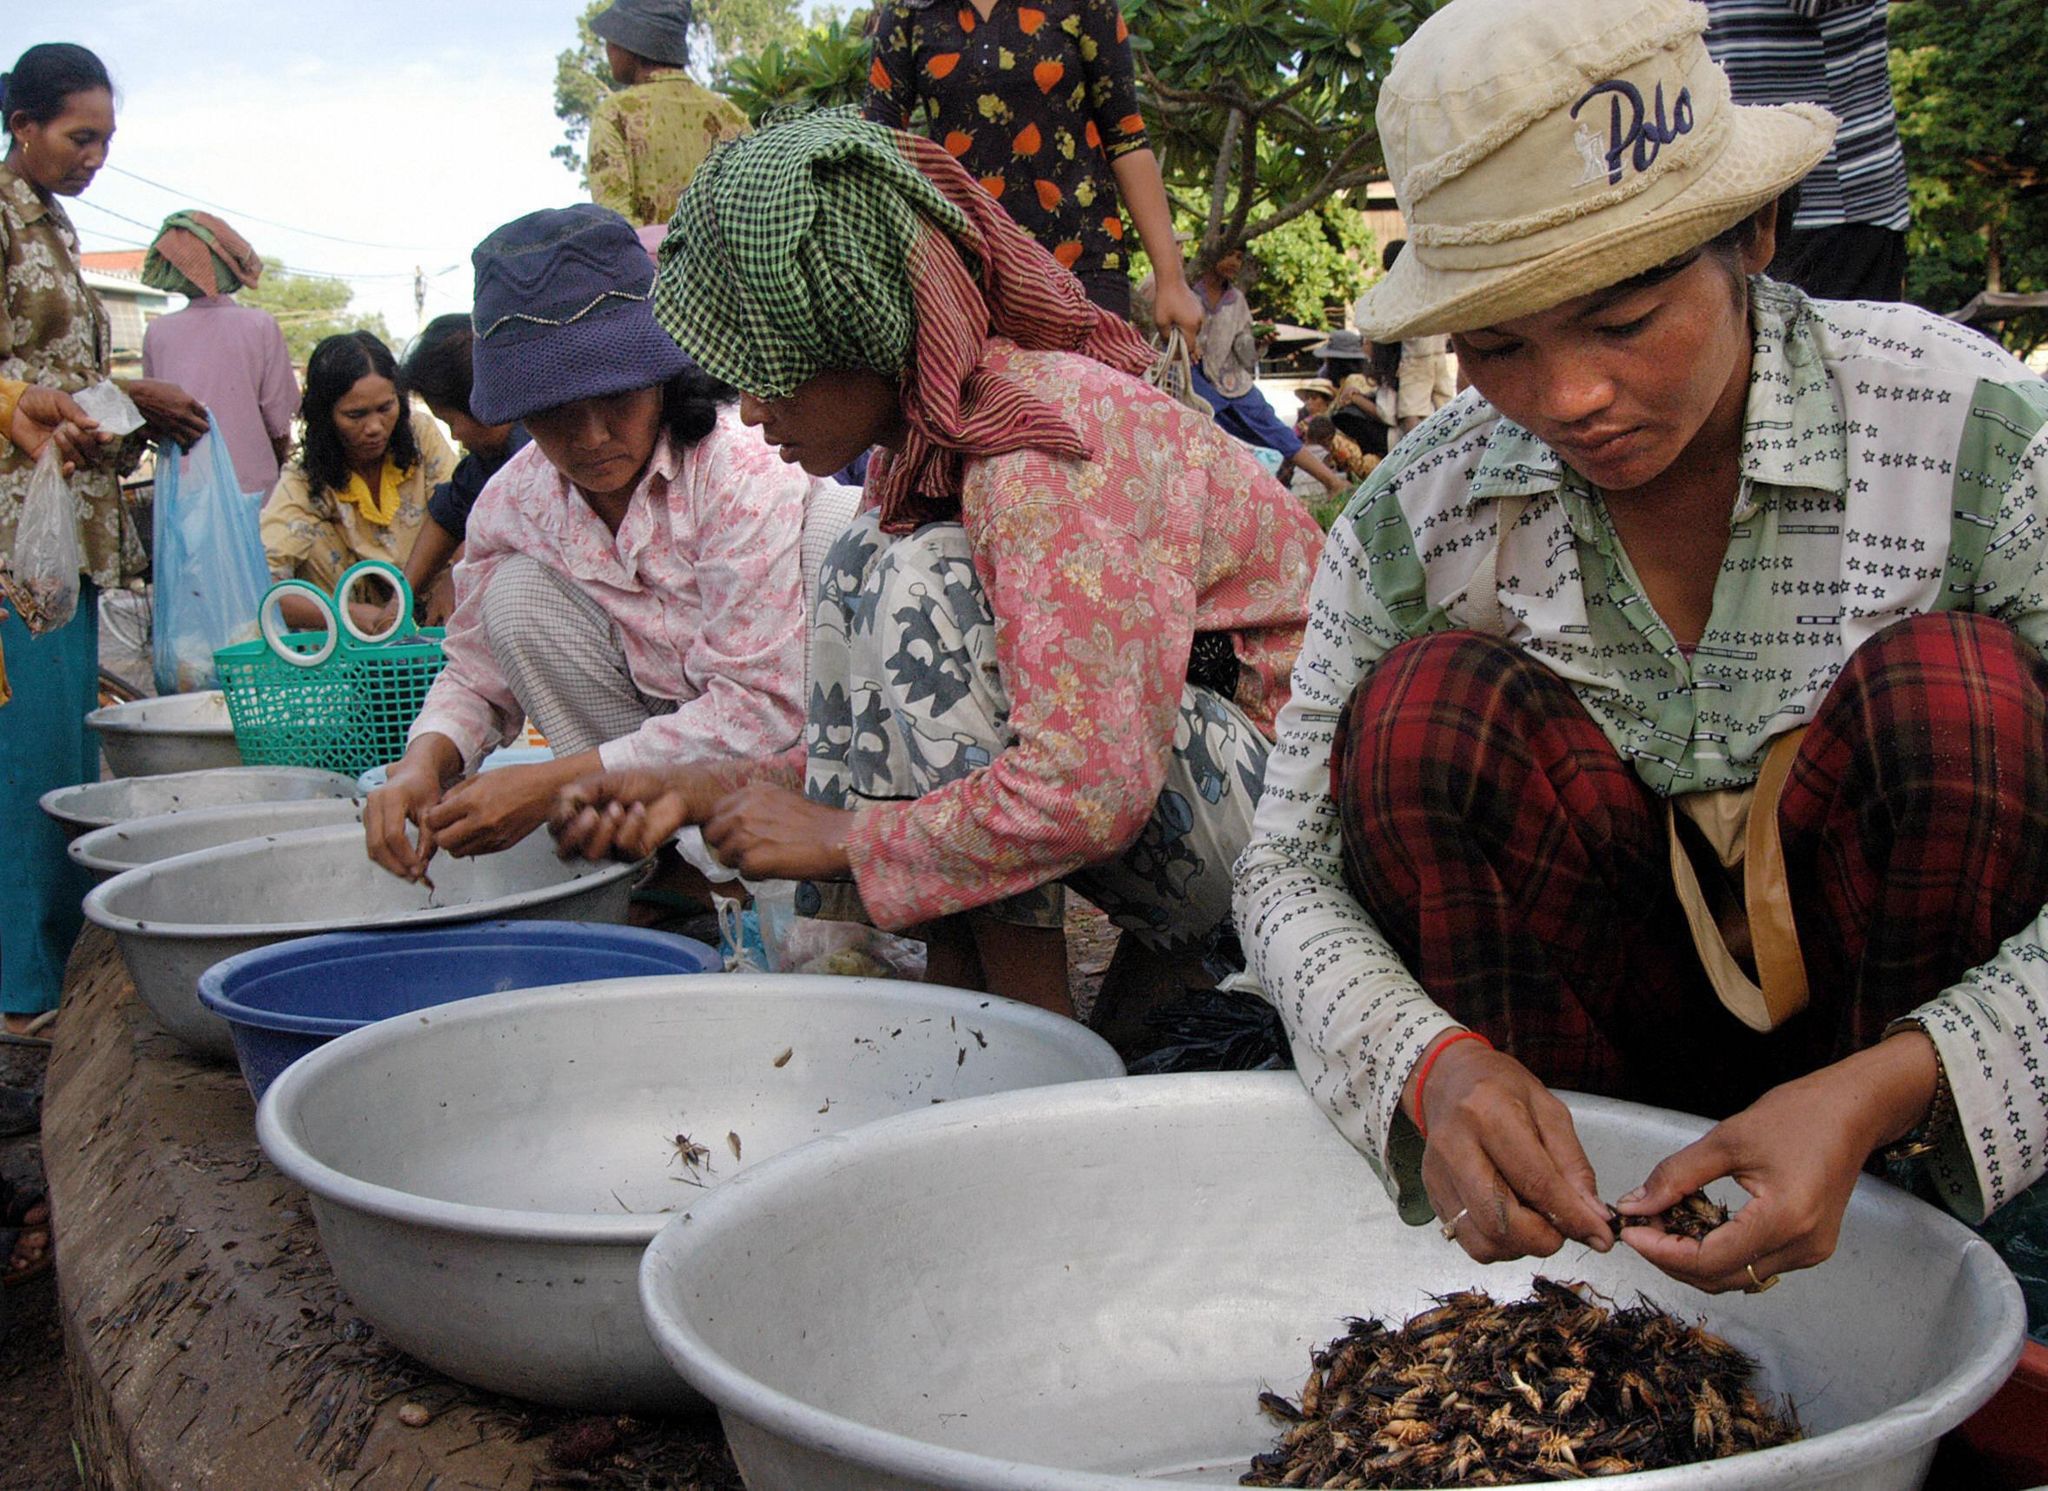 Market workers sort crickets to sell